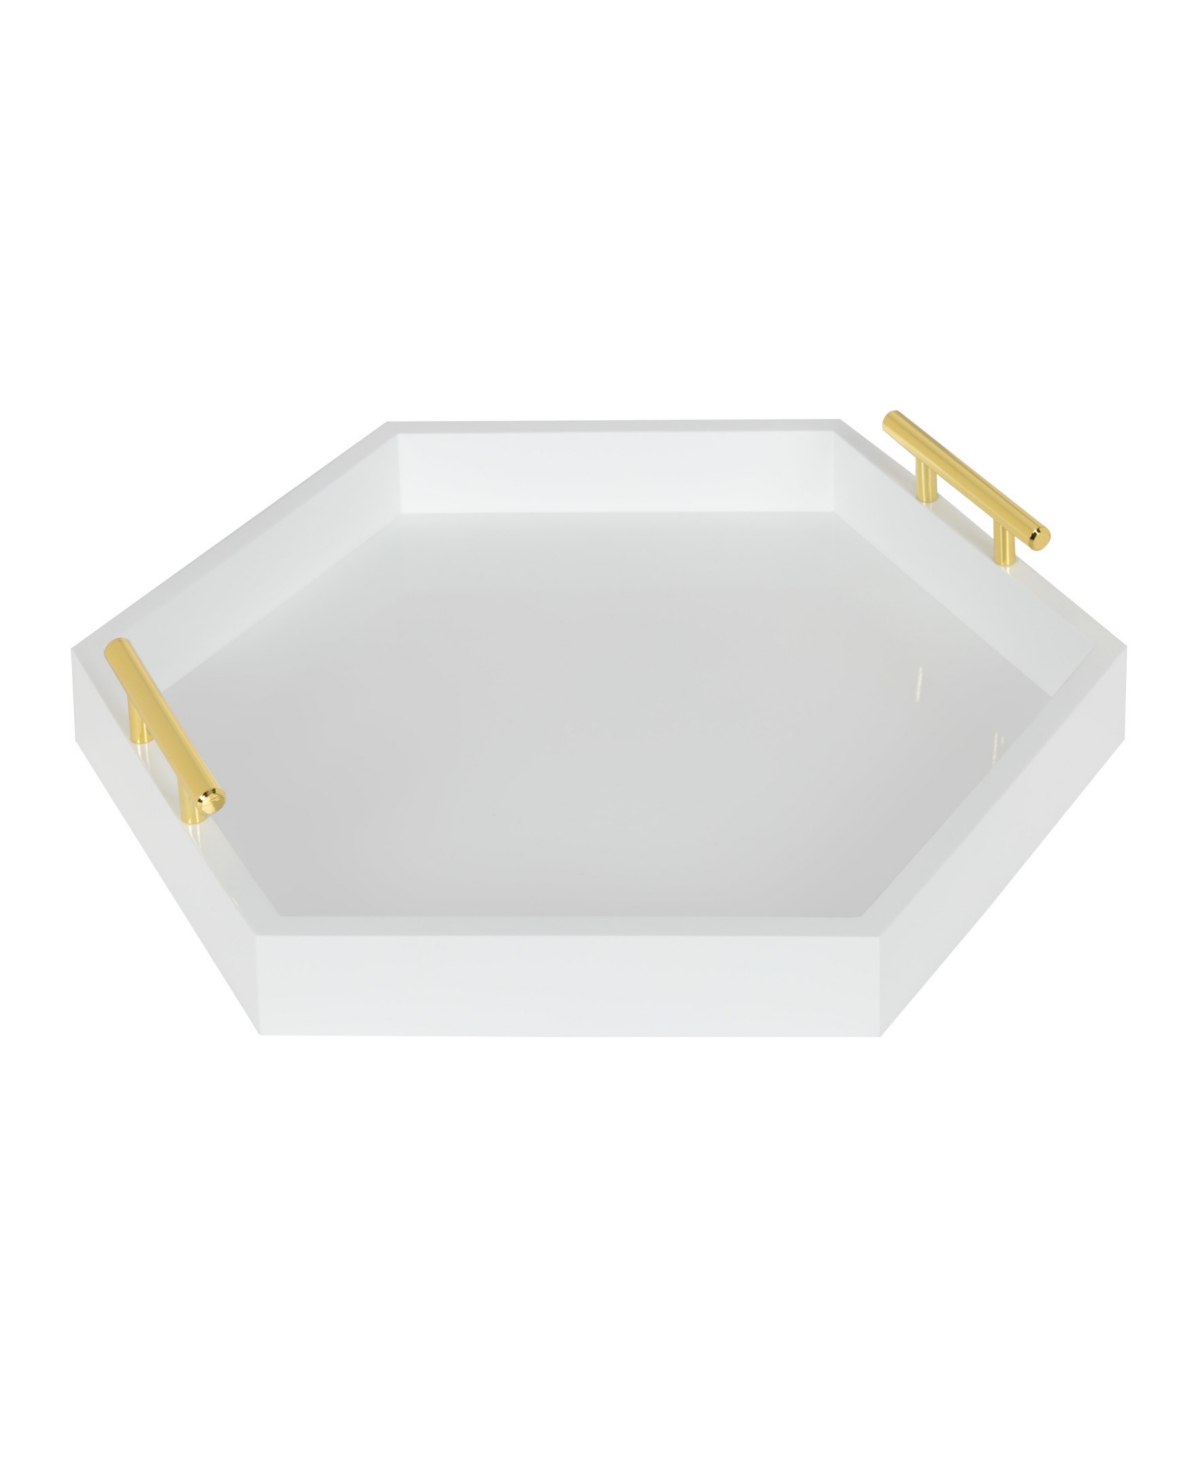 Kate And Laurel Lipton Hexagon Decorative Tray With Metal Handles In White